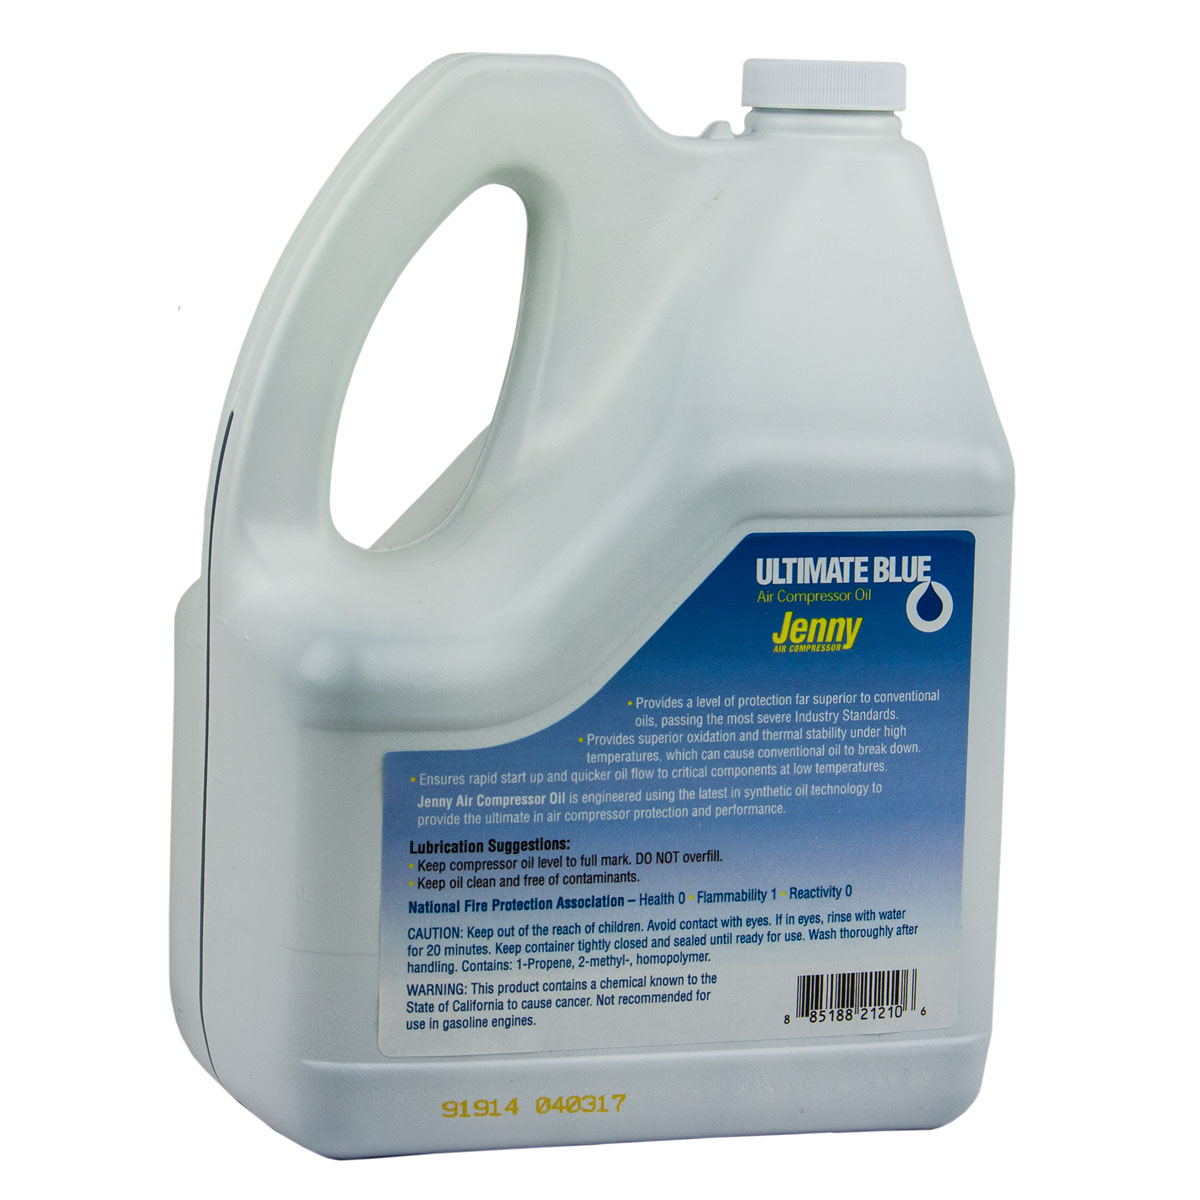 Jenny Products, Inc. Air Compressor Oil 100% Synthetic 1 GA Gallon Jenny Ultimate Blue 105-1210